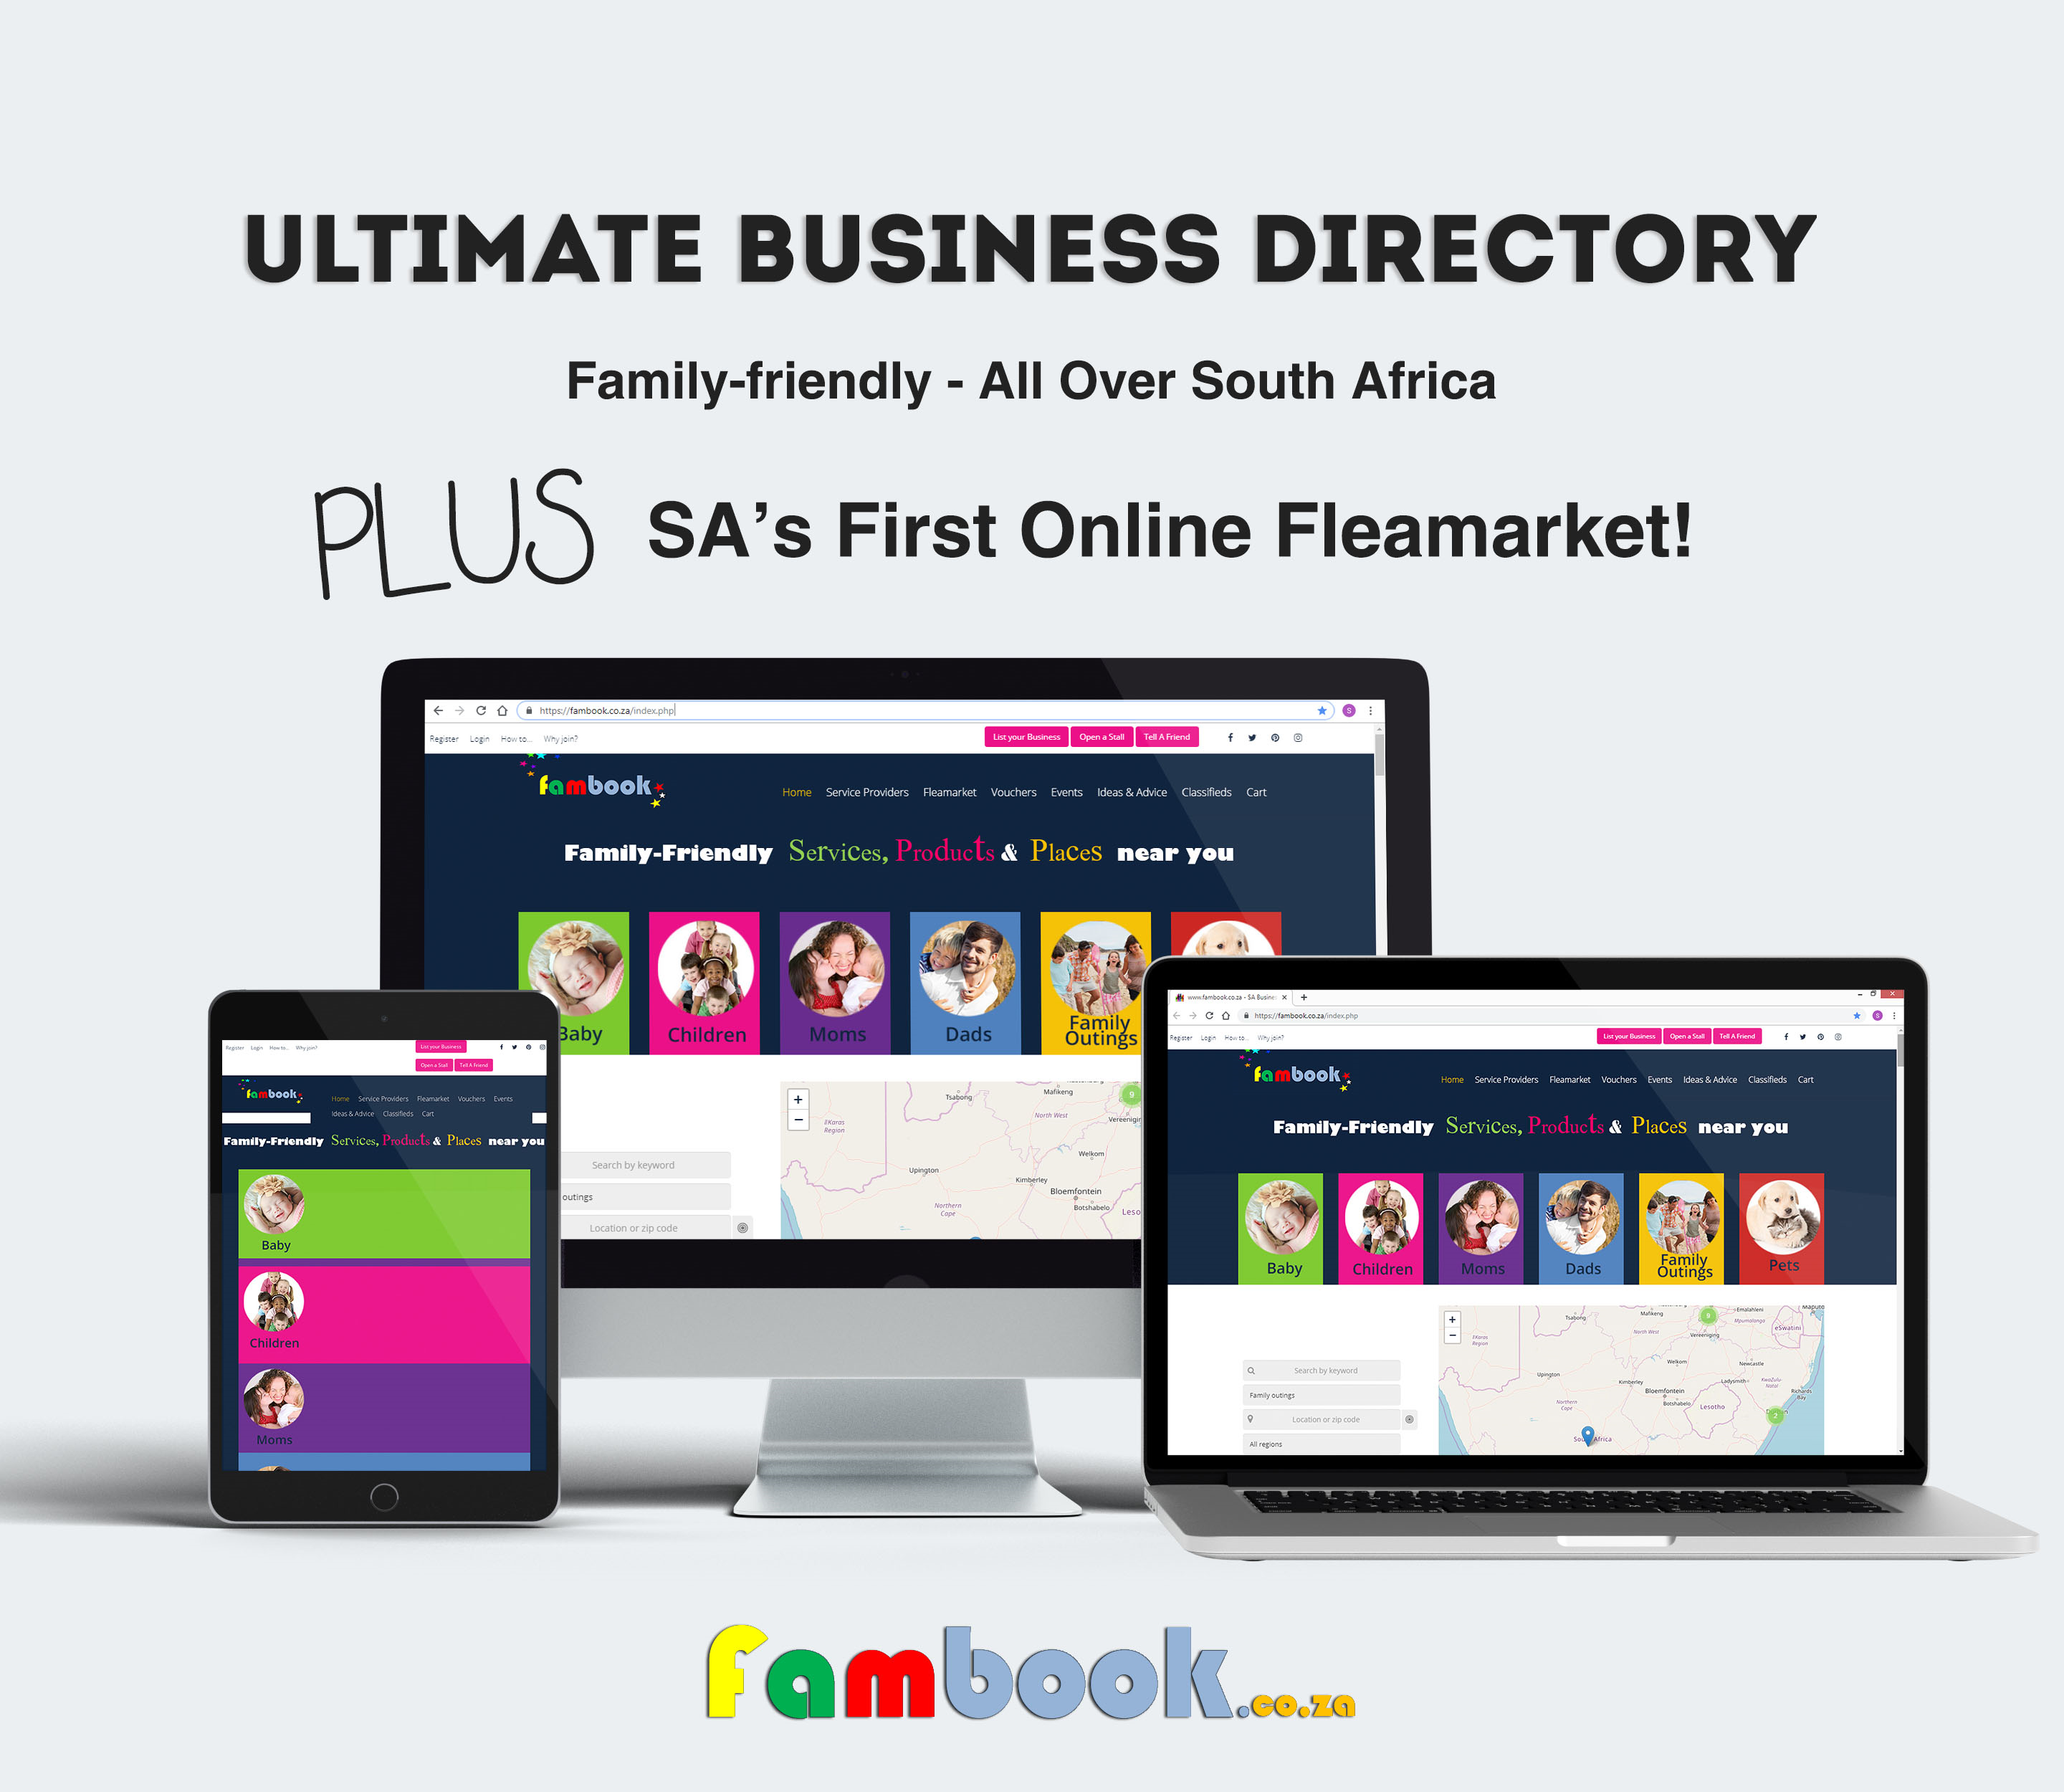 List your business on Fambook.co.za and get free social media promotion